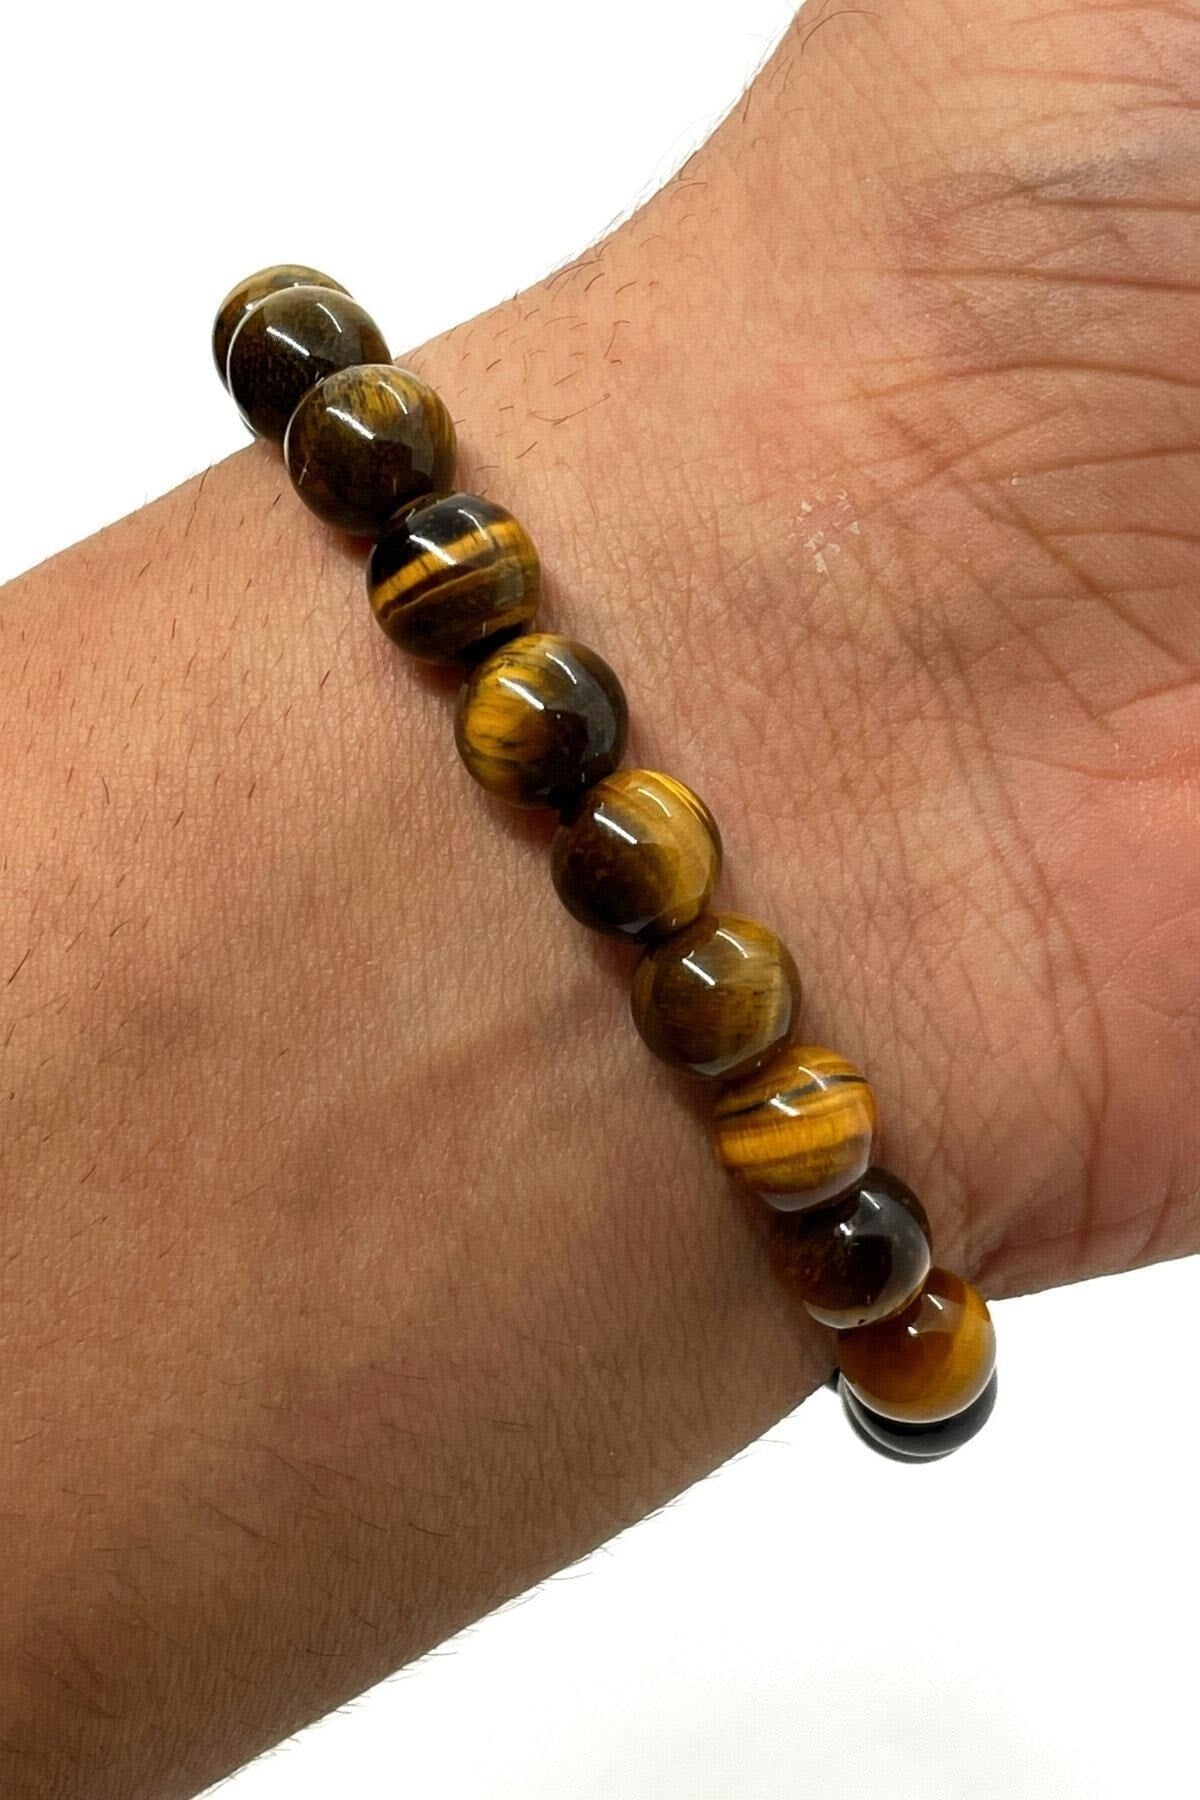 Natural Stone - Tiger Eye Bracelet - Courage - Confidence - Power - Happiness - Unisex